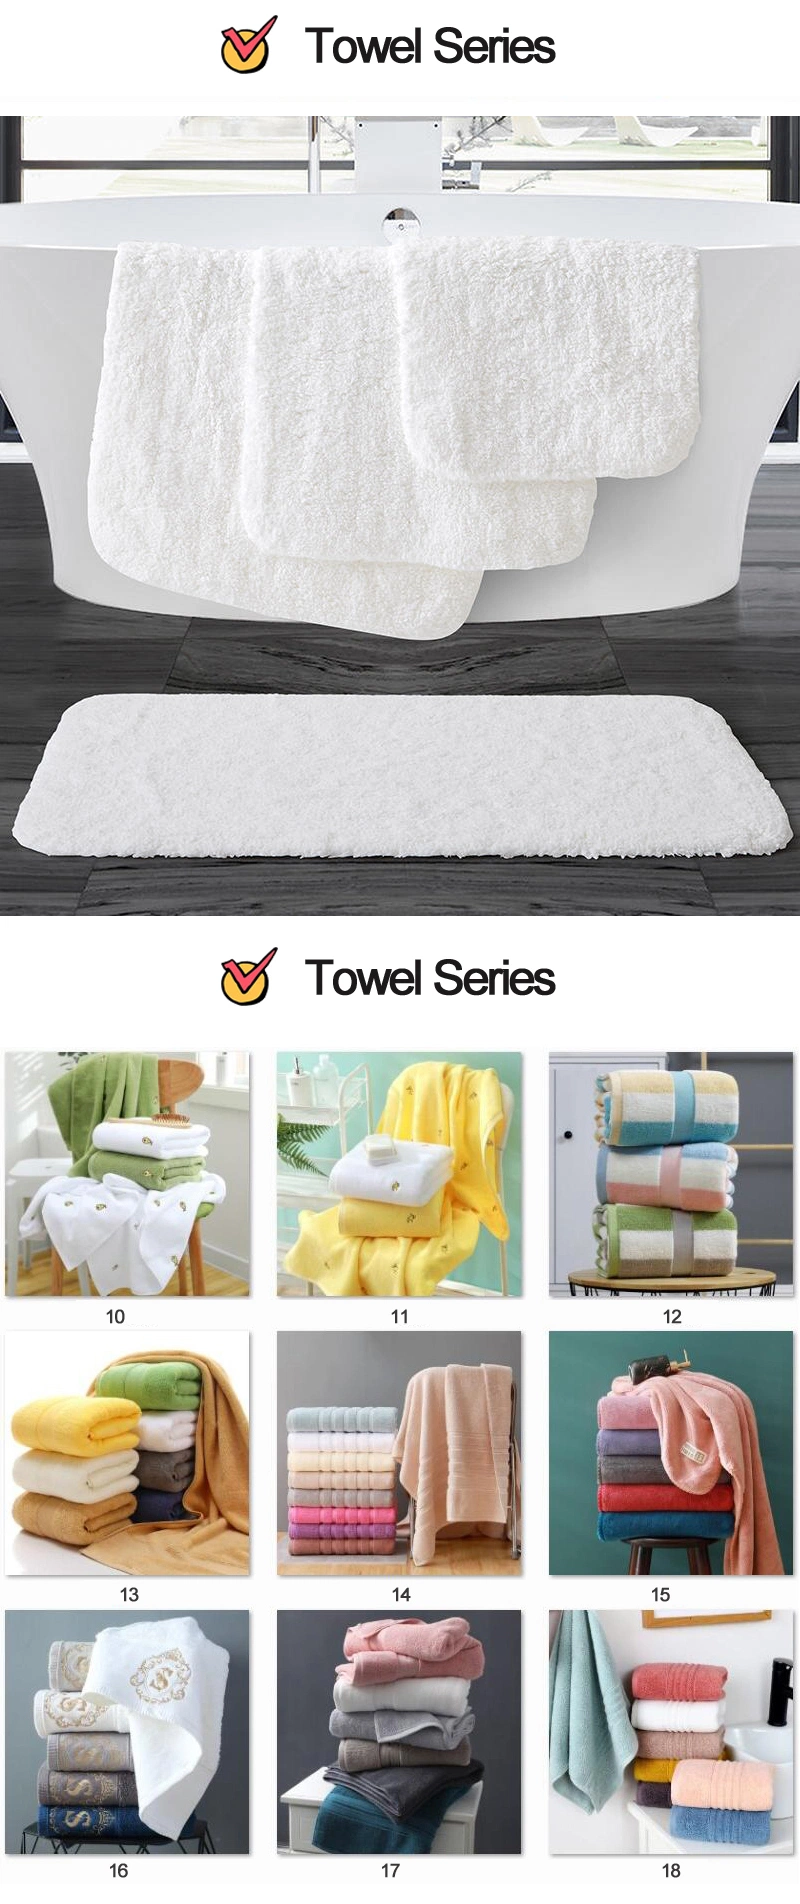 Hotel Supply Water Absorbent Bath Rug Oversized Thick Shaggy 100% Cotton White 20 X 31 Inch Non-Slip